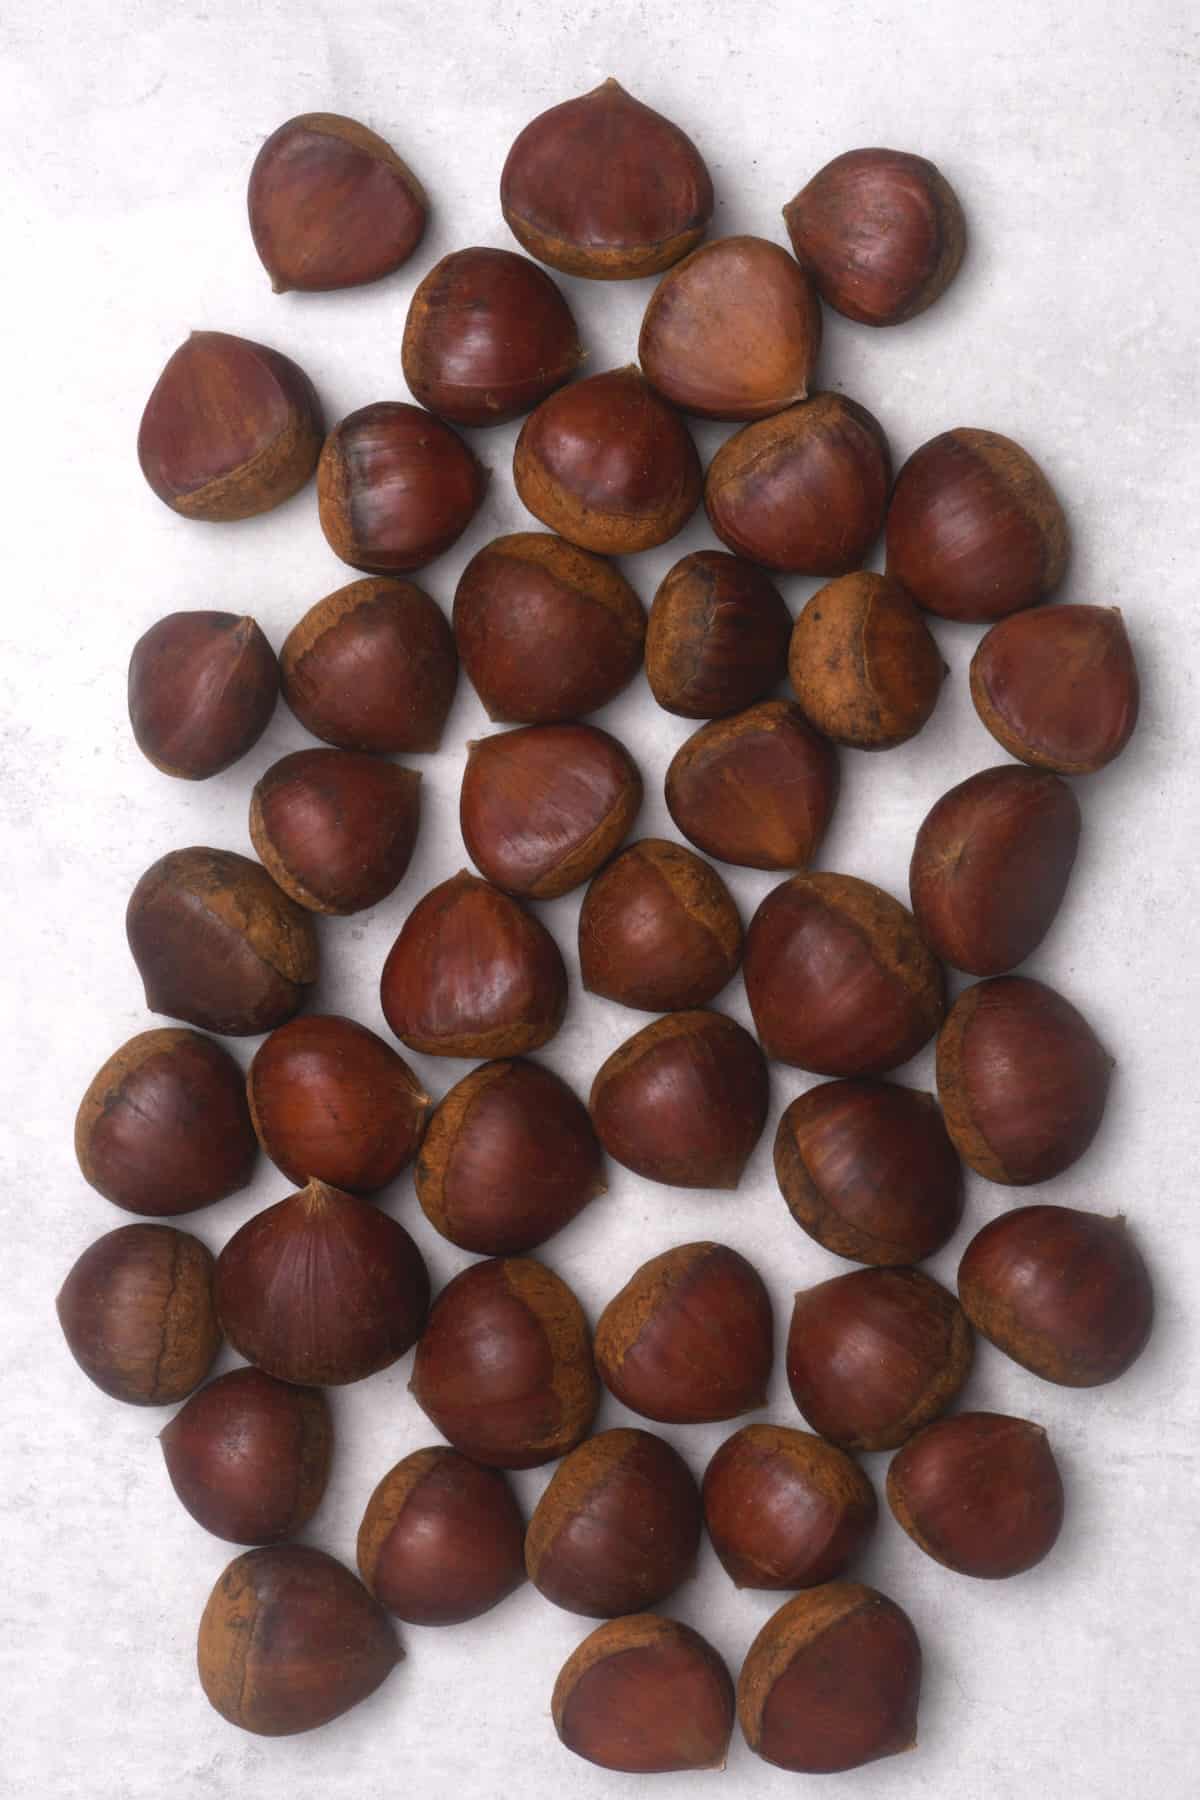 Sweet chestnuts on a flat surface